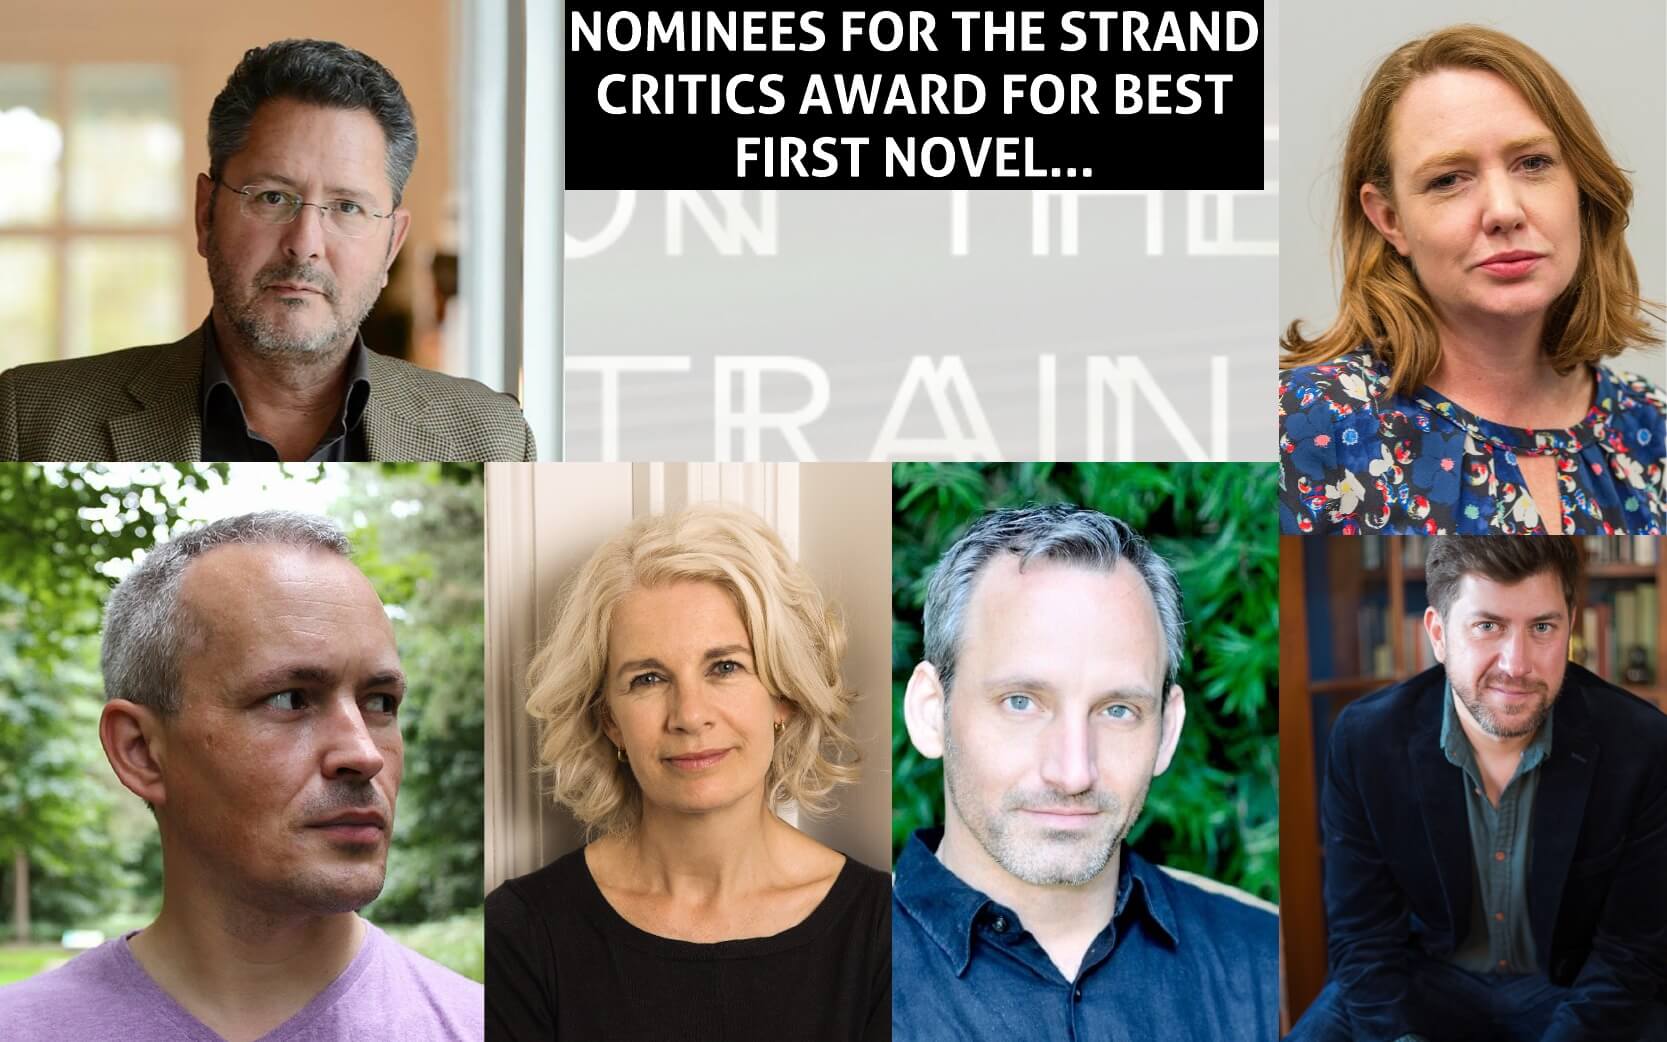 nominees for critics awards for best first novel